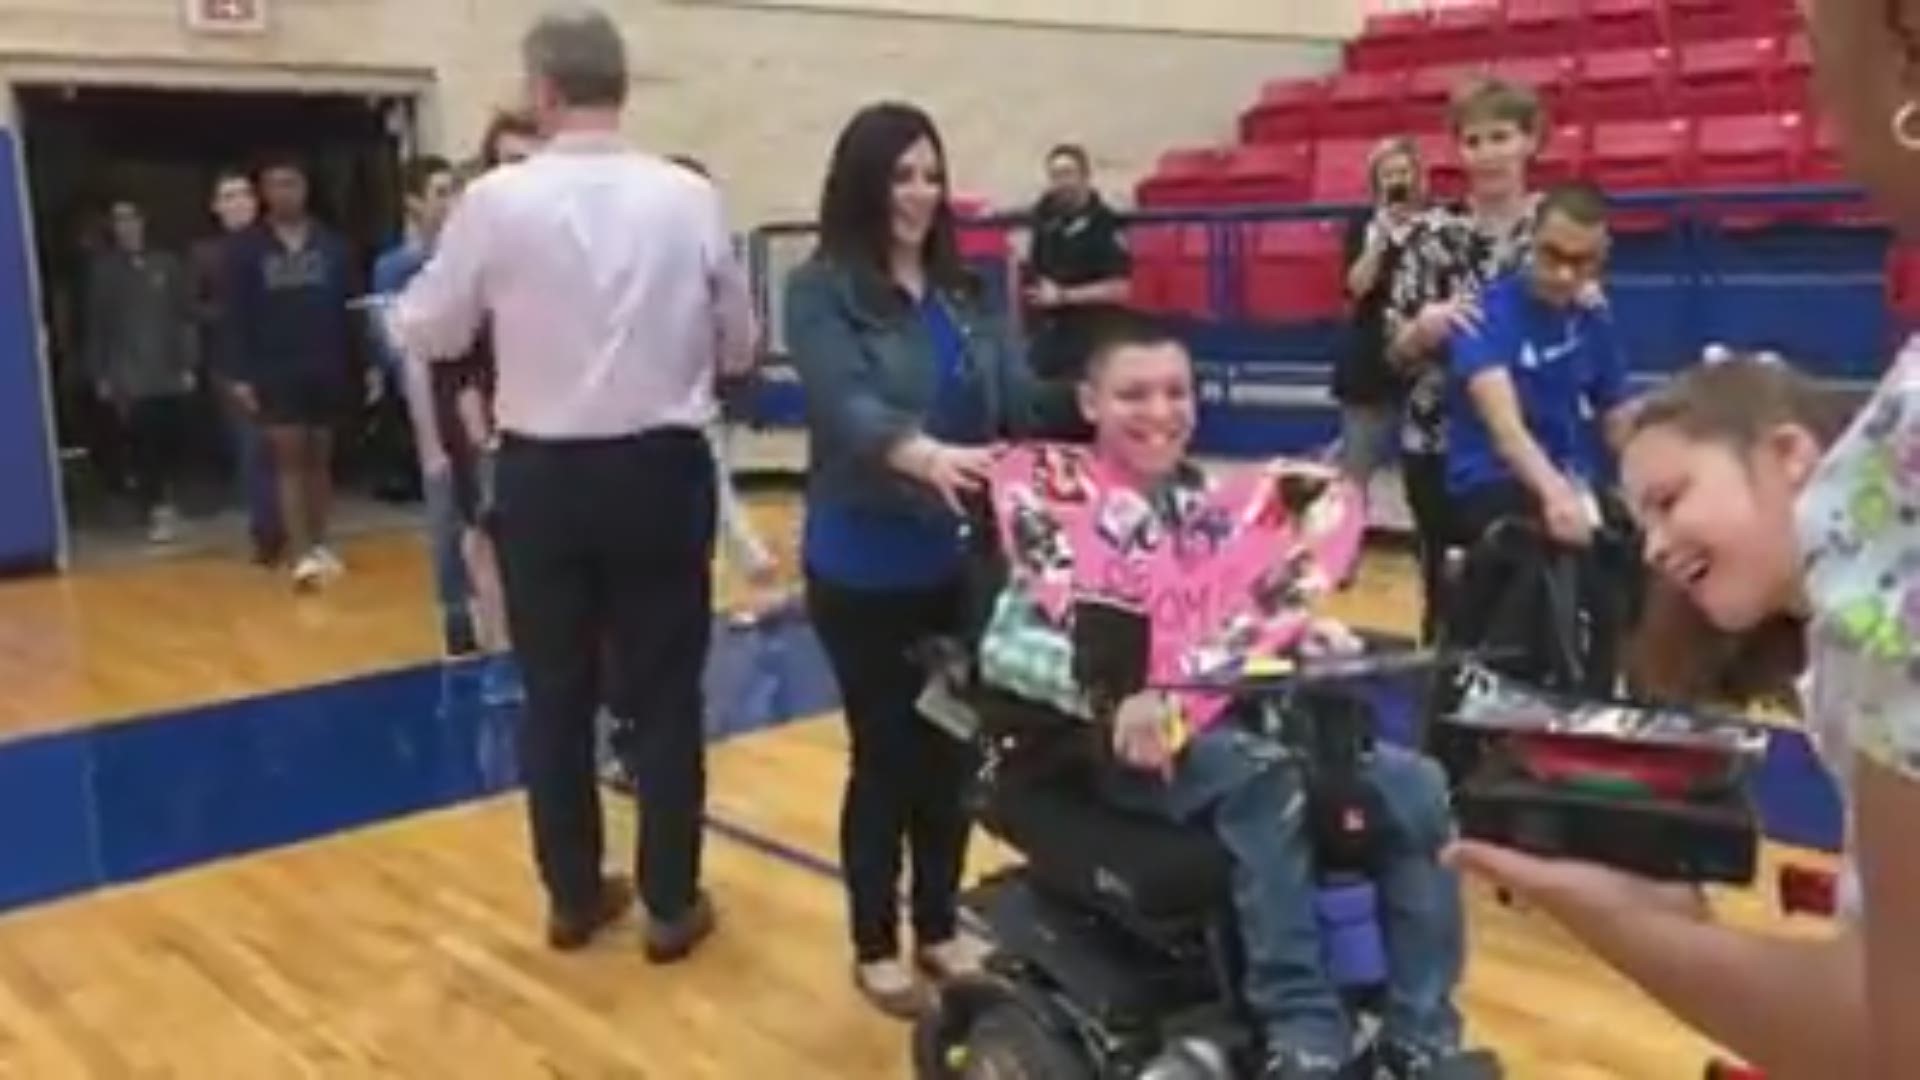 Benjamin, a Midway High School student with special needs, is winning the internet after a promposal to his life-long friend Kendall, who also has special needs.